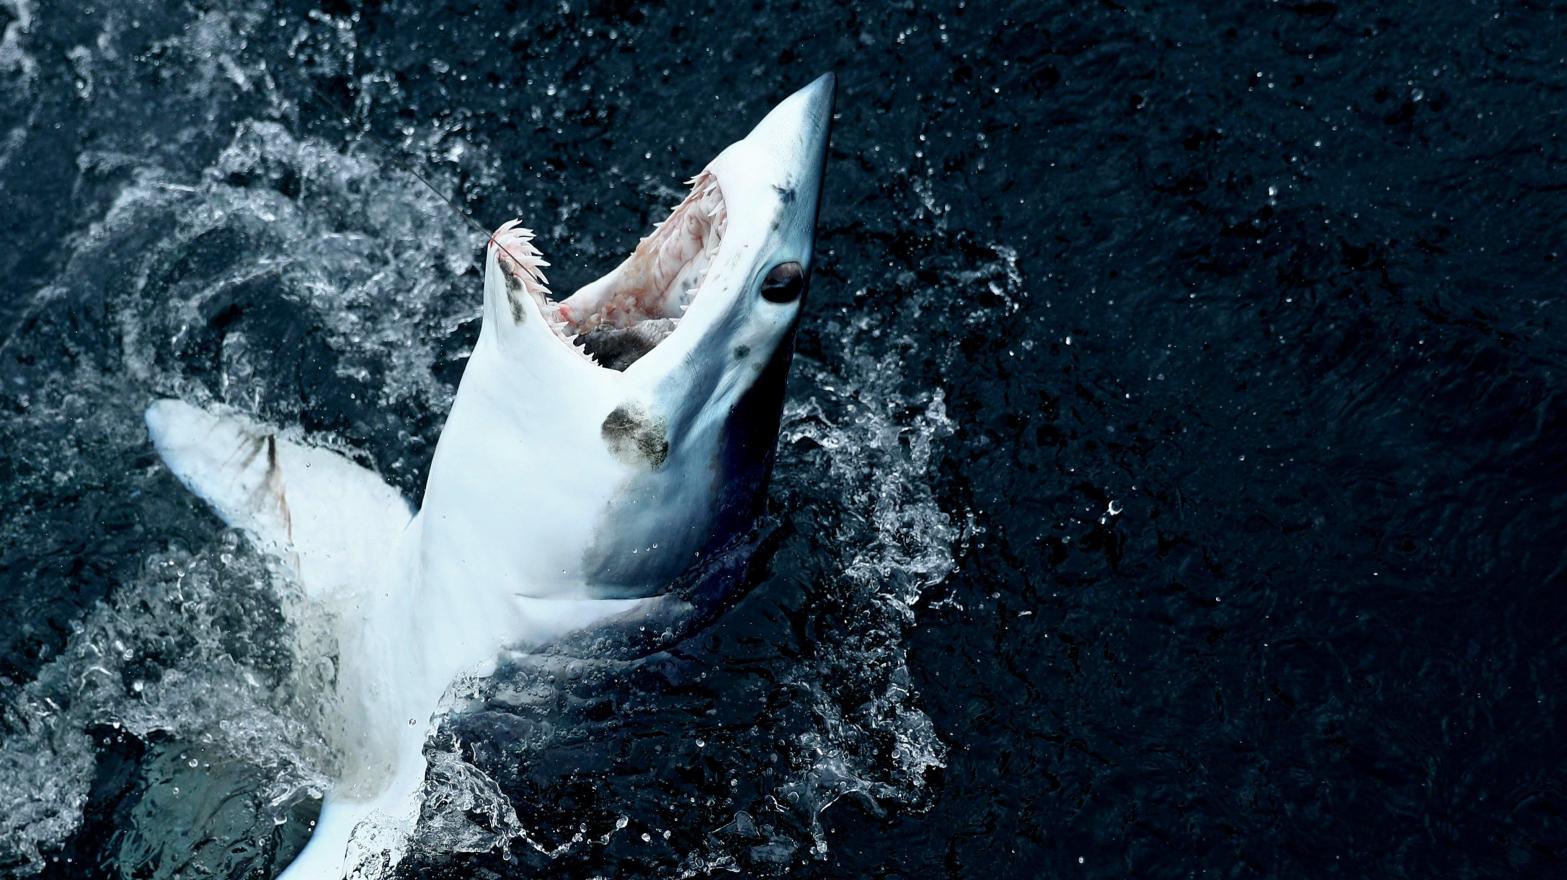 The mako shark flopped around the boat's bow for about 2 minutes before wriggling free. (Image: Maddie Meyer, Getty Images)